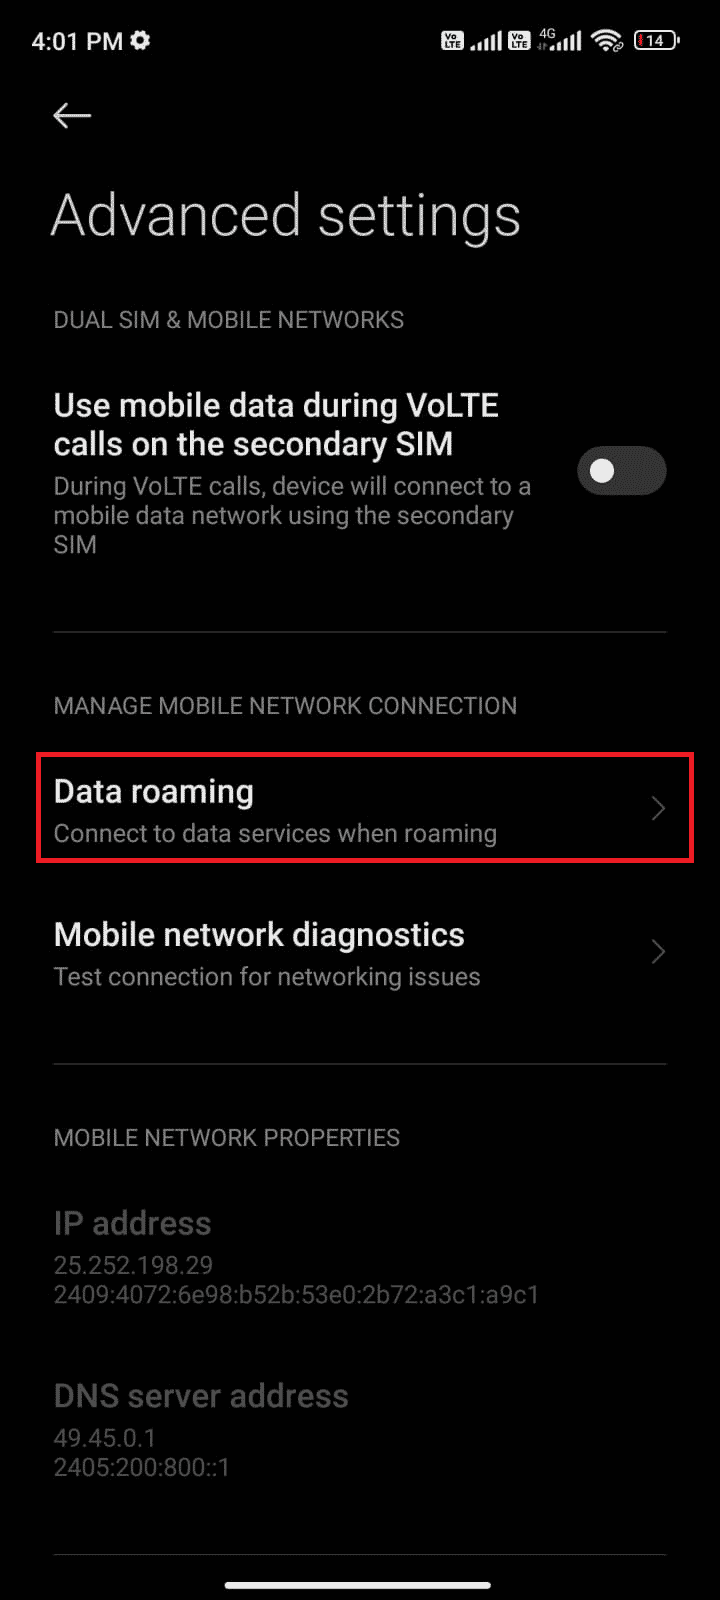 Then, tap on Data roaming